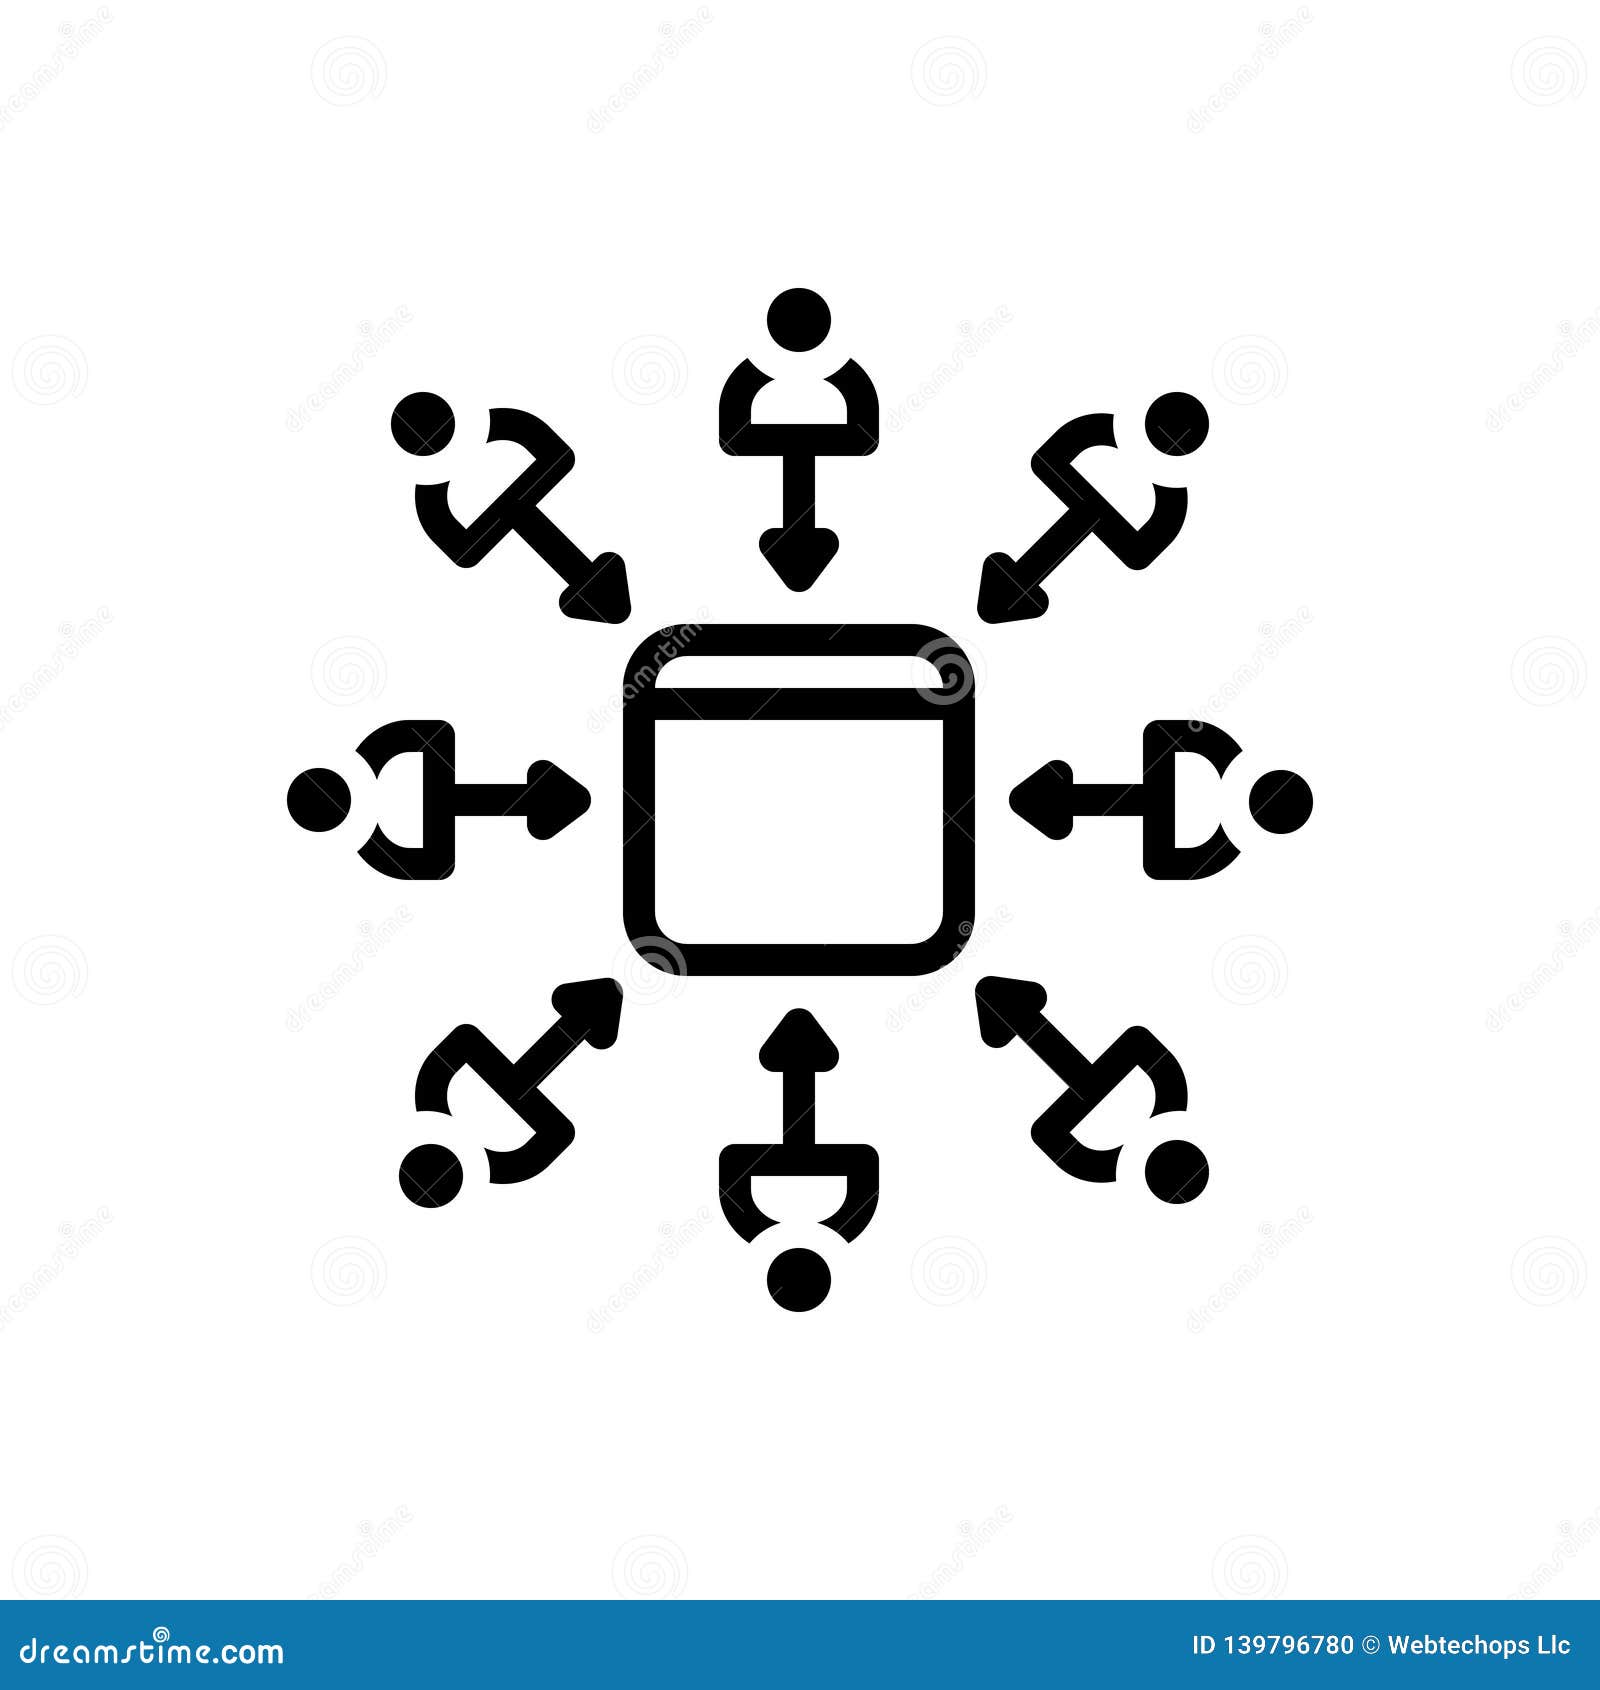 black line icon for leads, business and sale